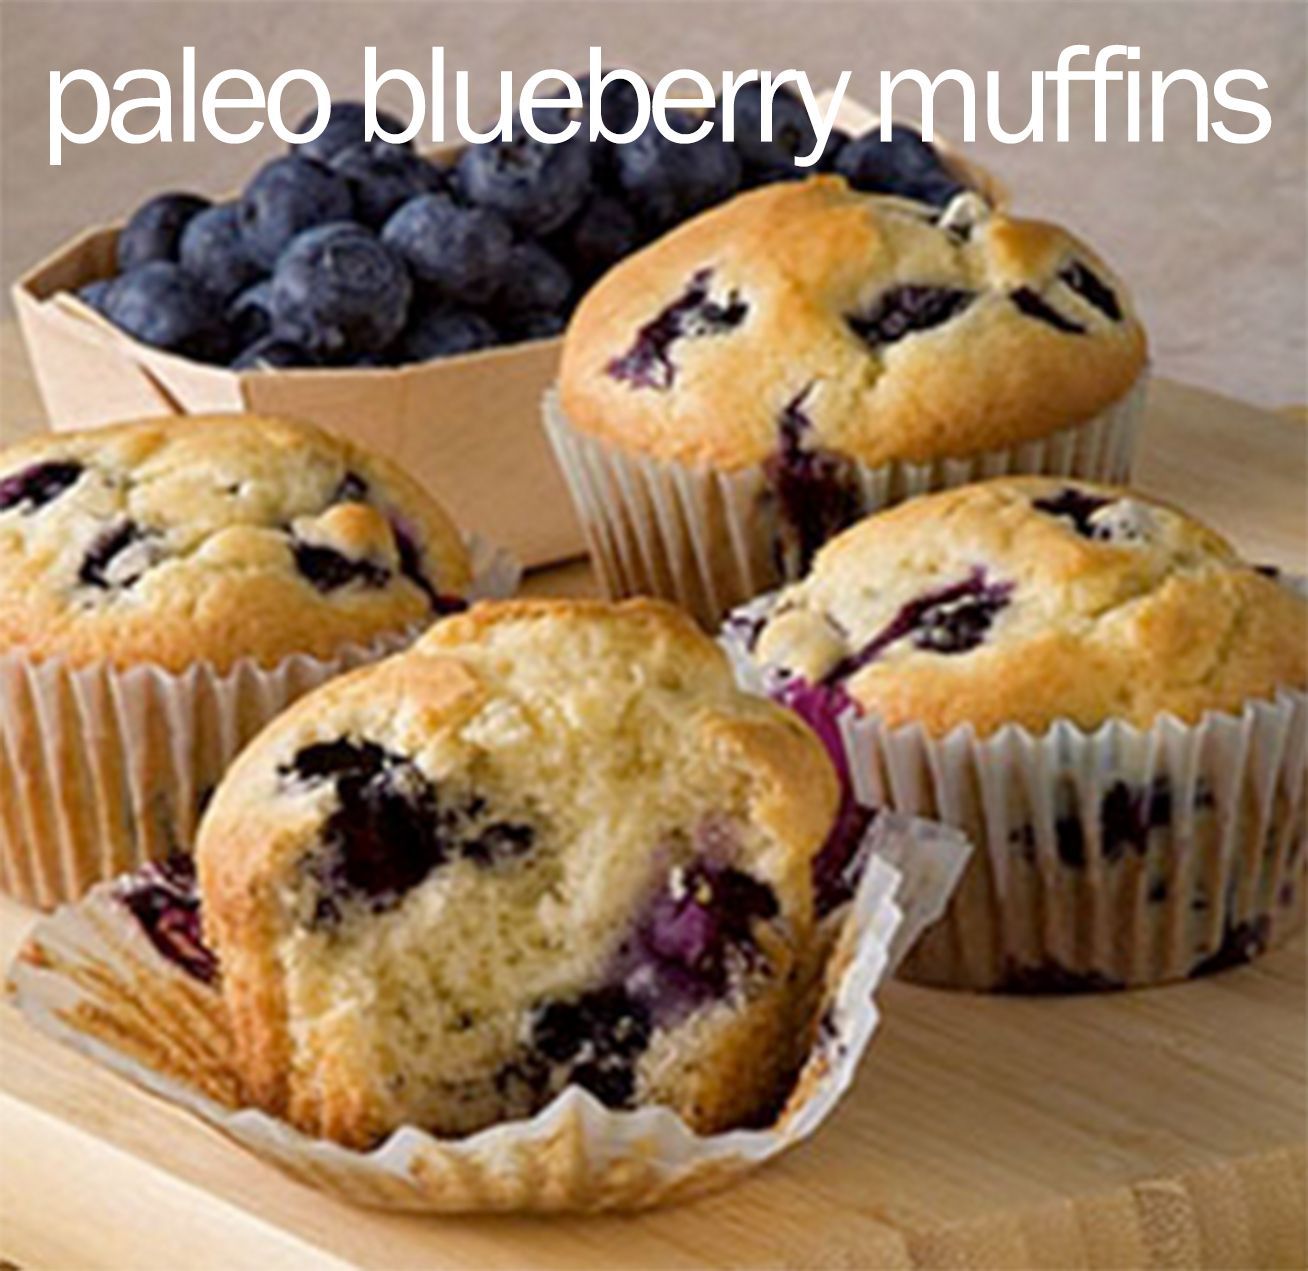 Hands down, best Paleo blueberry muffin recipe out there! These are amazing!! From